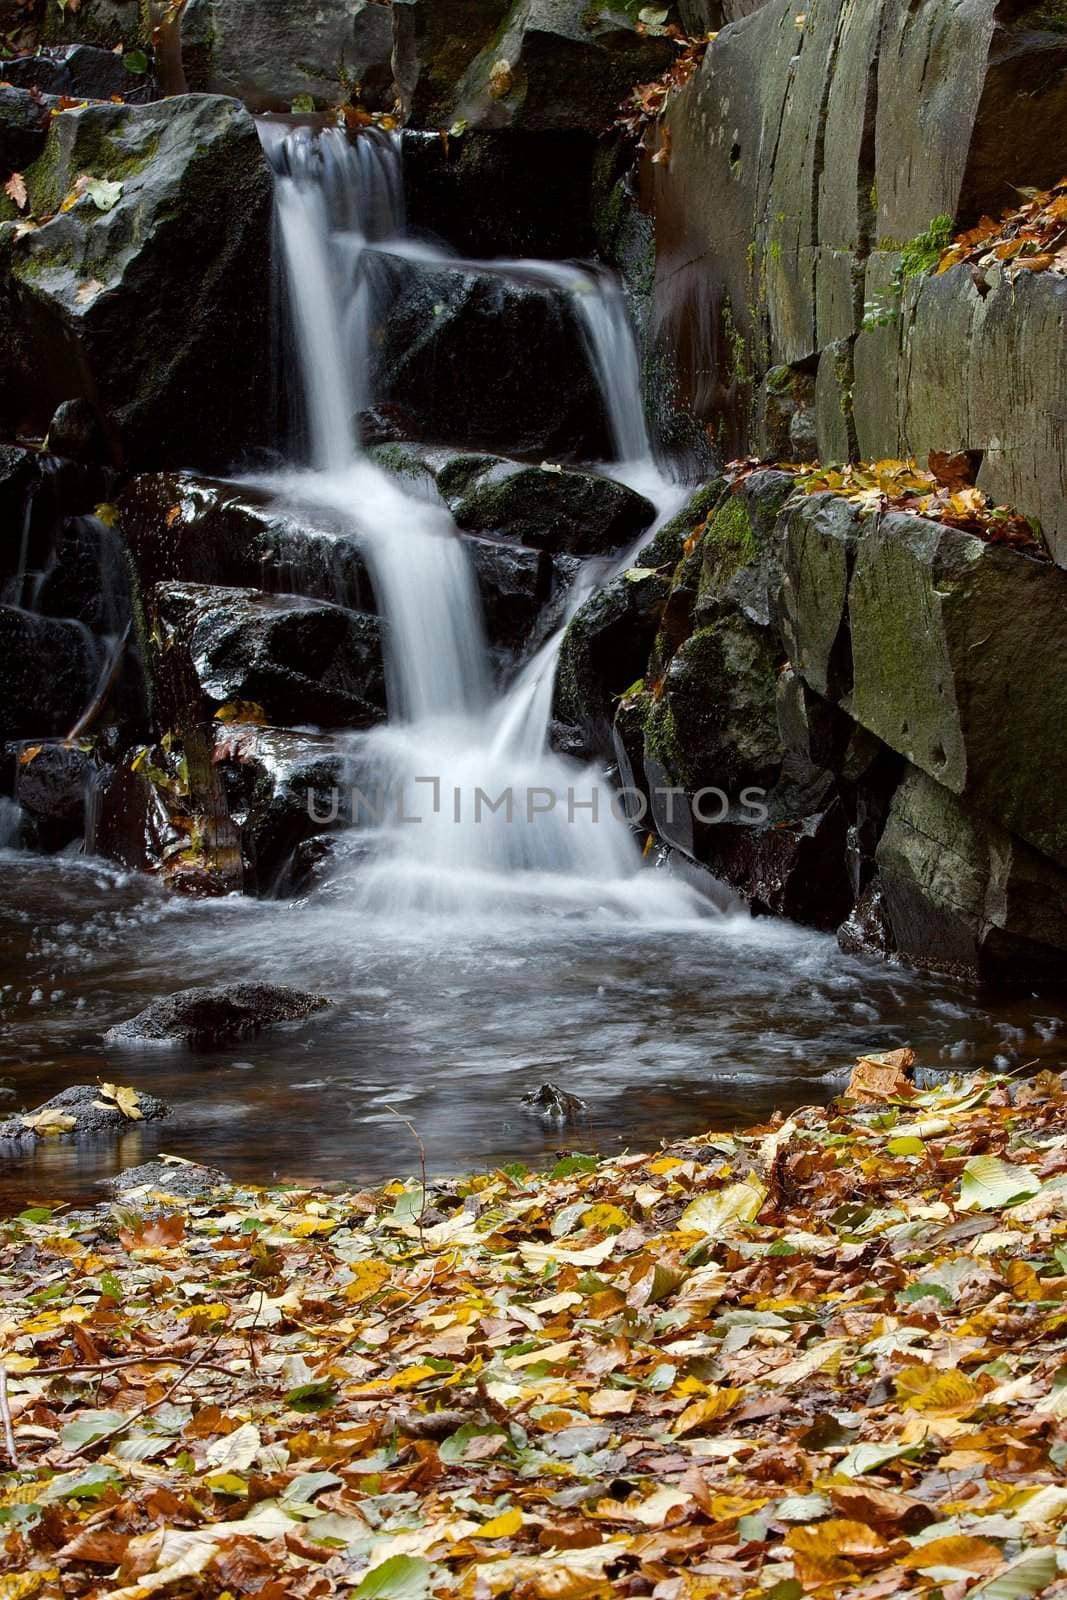 Small waterfall and fallen autumn leaves